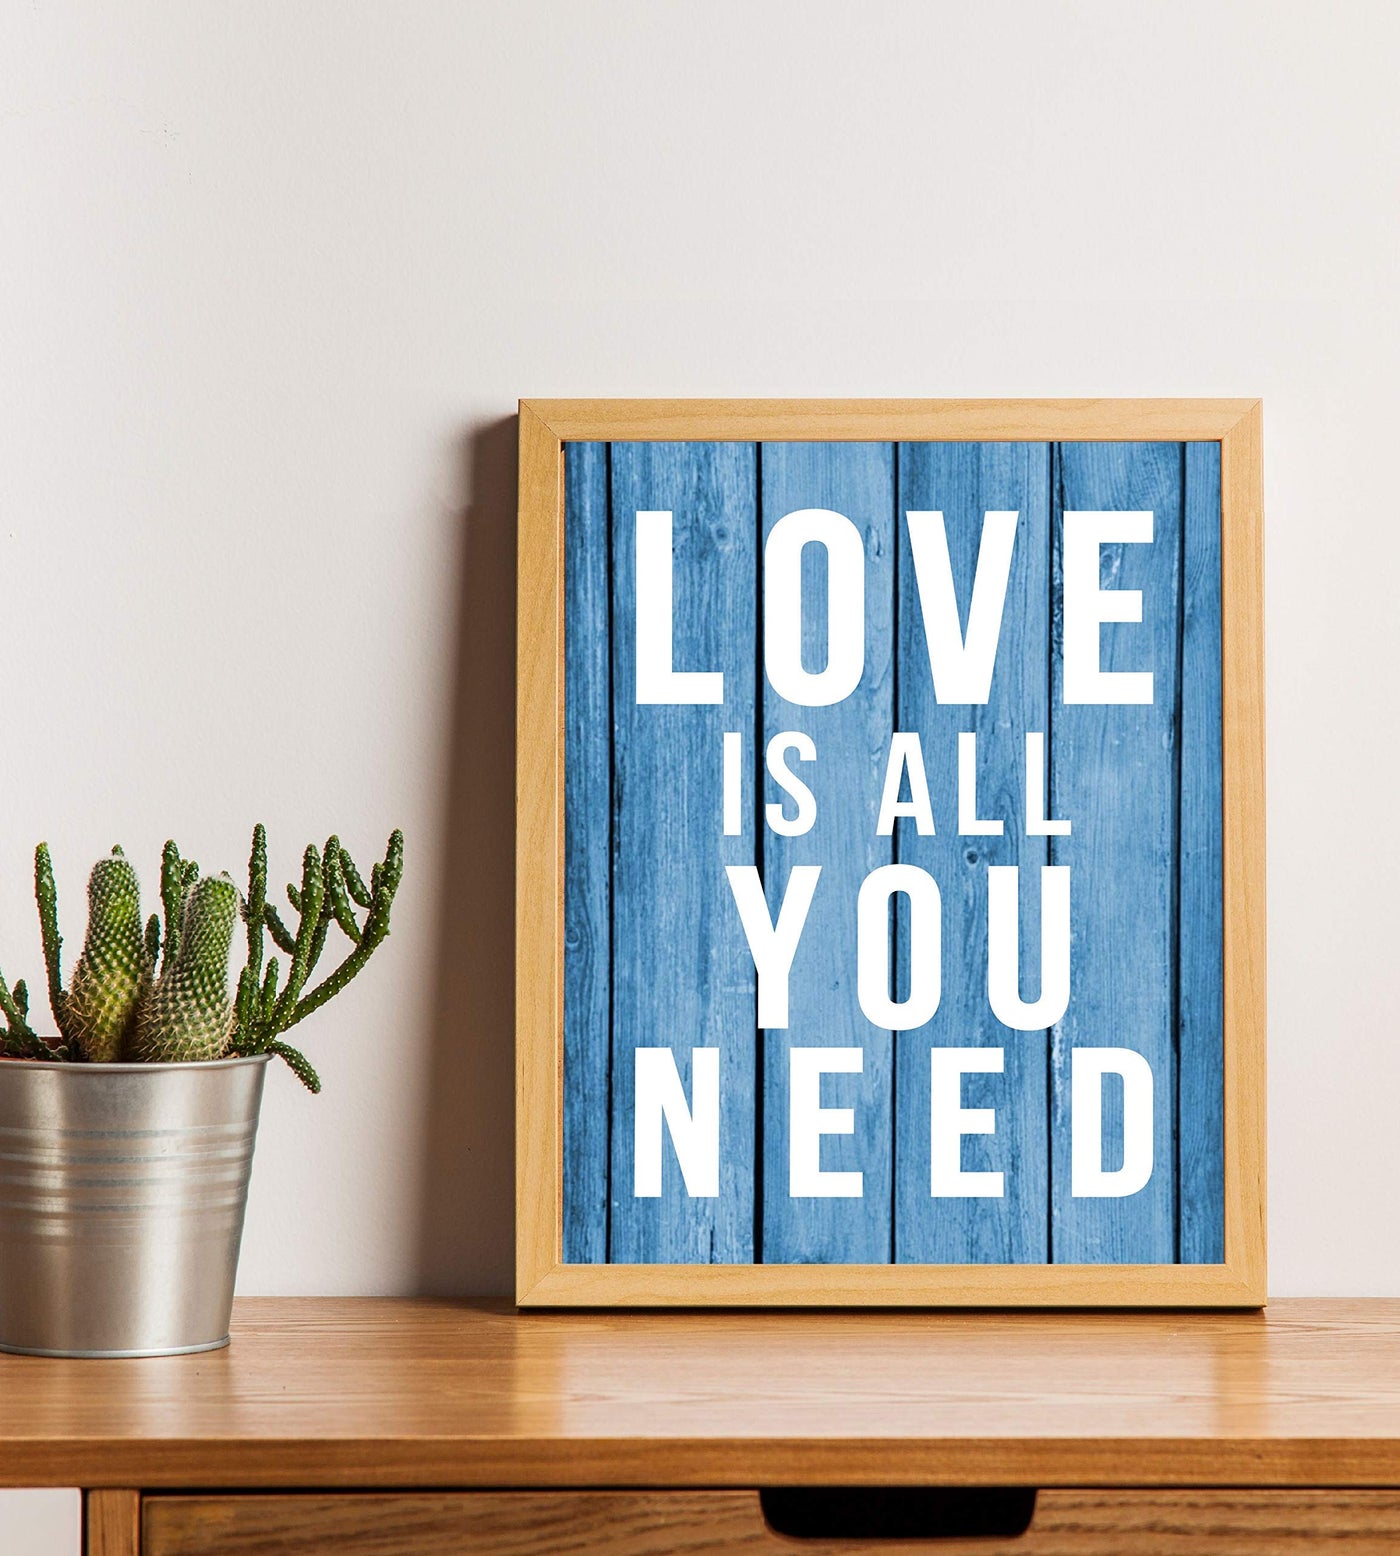 Love Is All You Need-Romantic Wall Art Sign-8 x 10" Inspirational Typographic Wall Print-Ready to Frame. Home-Office-Bedroom-Dorm Decor. Simple, Heartfelt Gift & Reminder-All You Need Is Love!